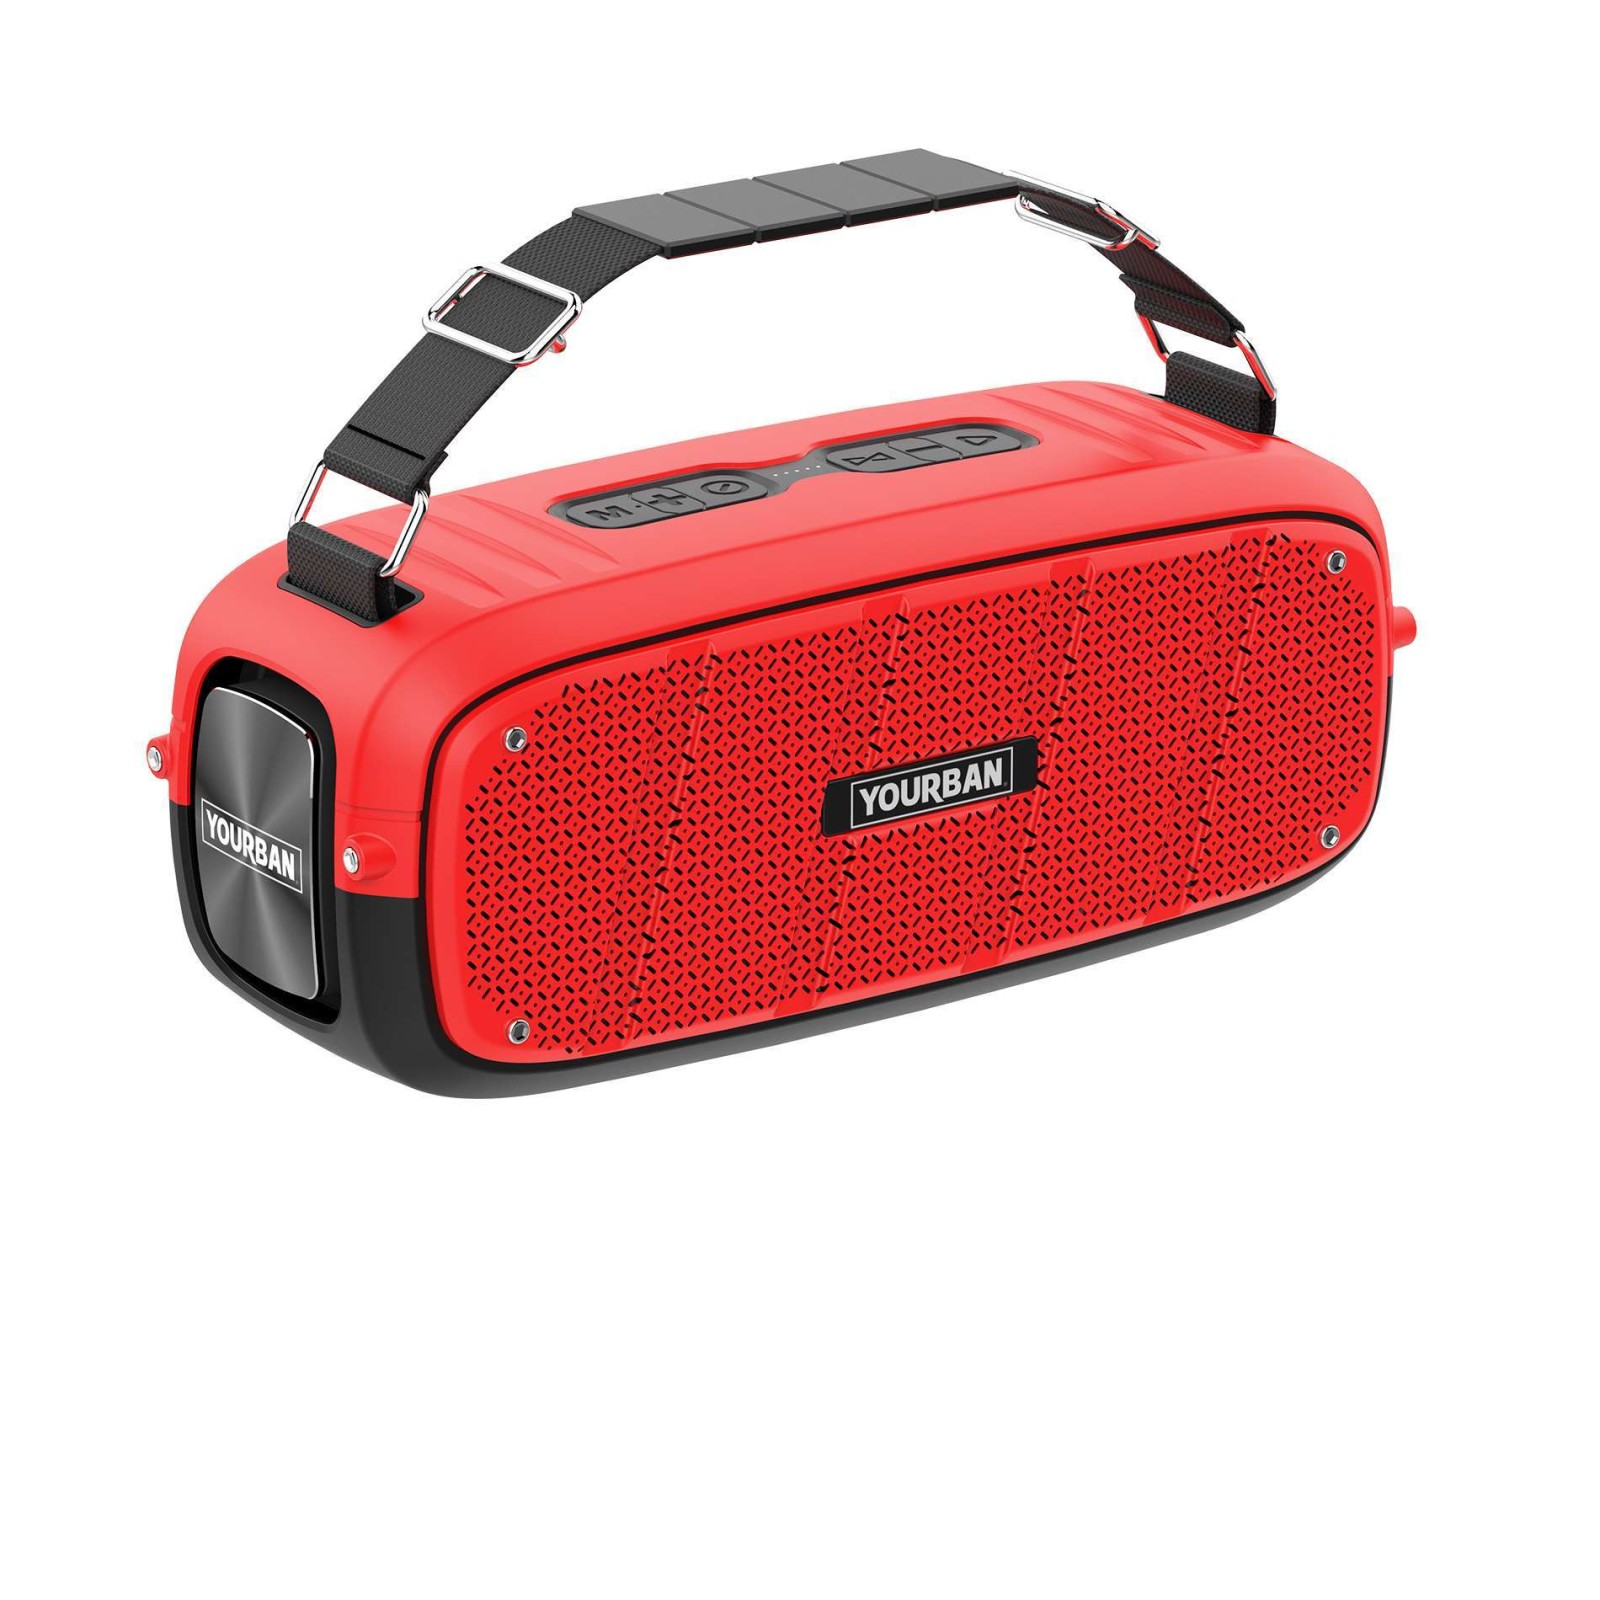 YOURBAN GETONE 60 RED - ENCEINTE NOMADE BLUETOOTH COMPACTE ROUGE